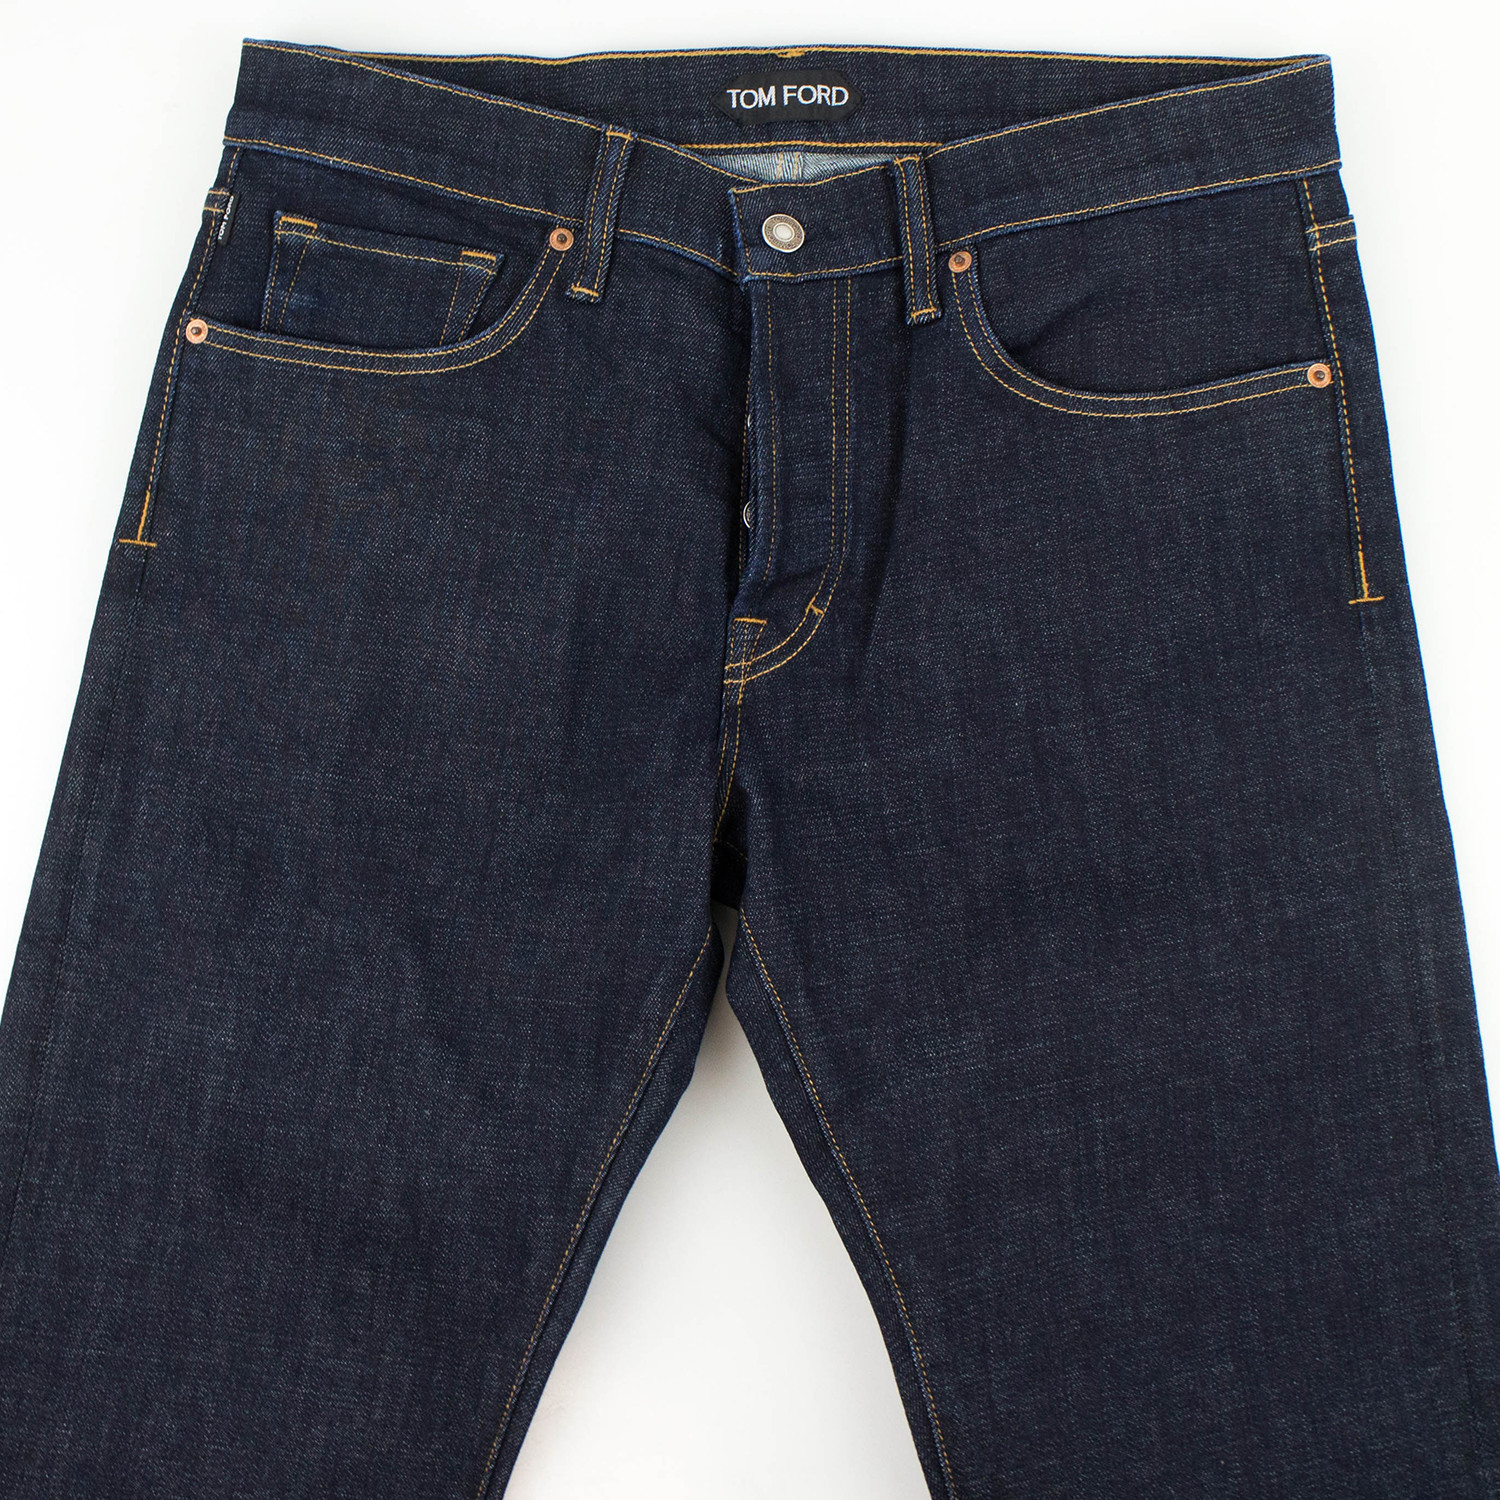 Tom Ford Straight Fit Denim // Blue Jeans (28WX33L) - Tom Ford and ...